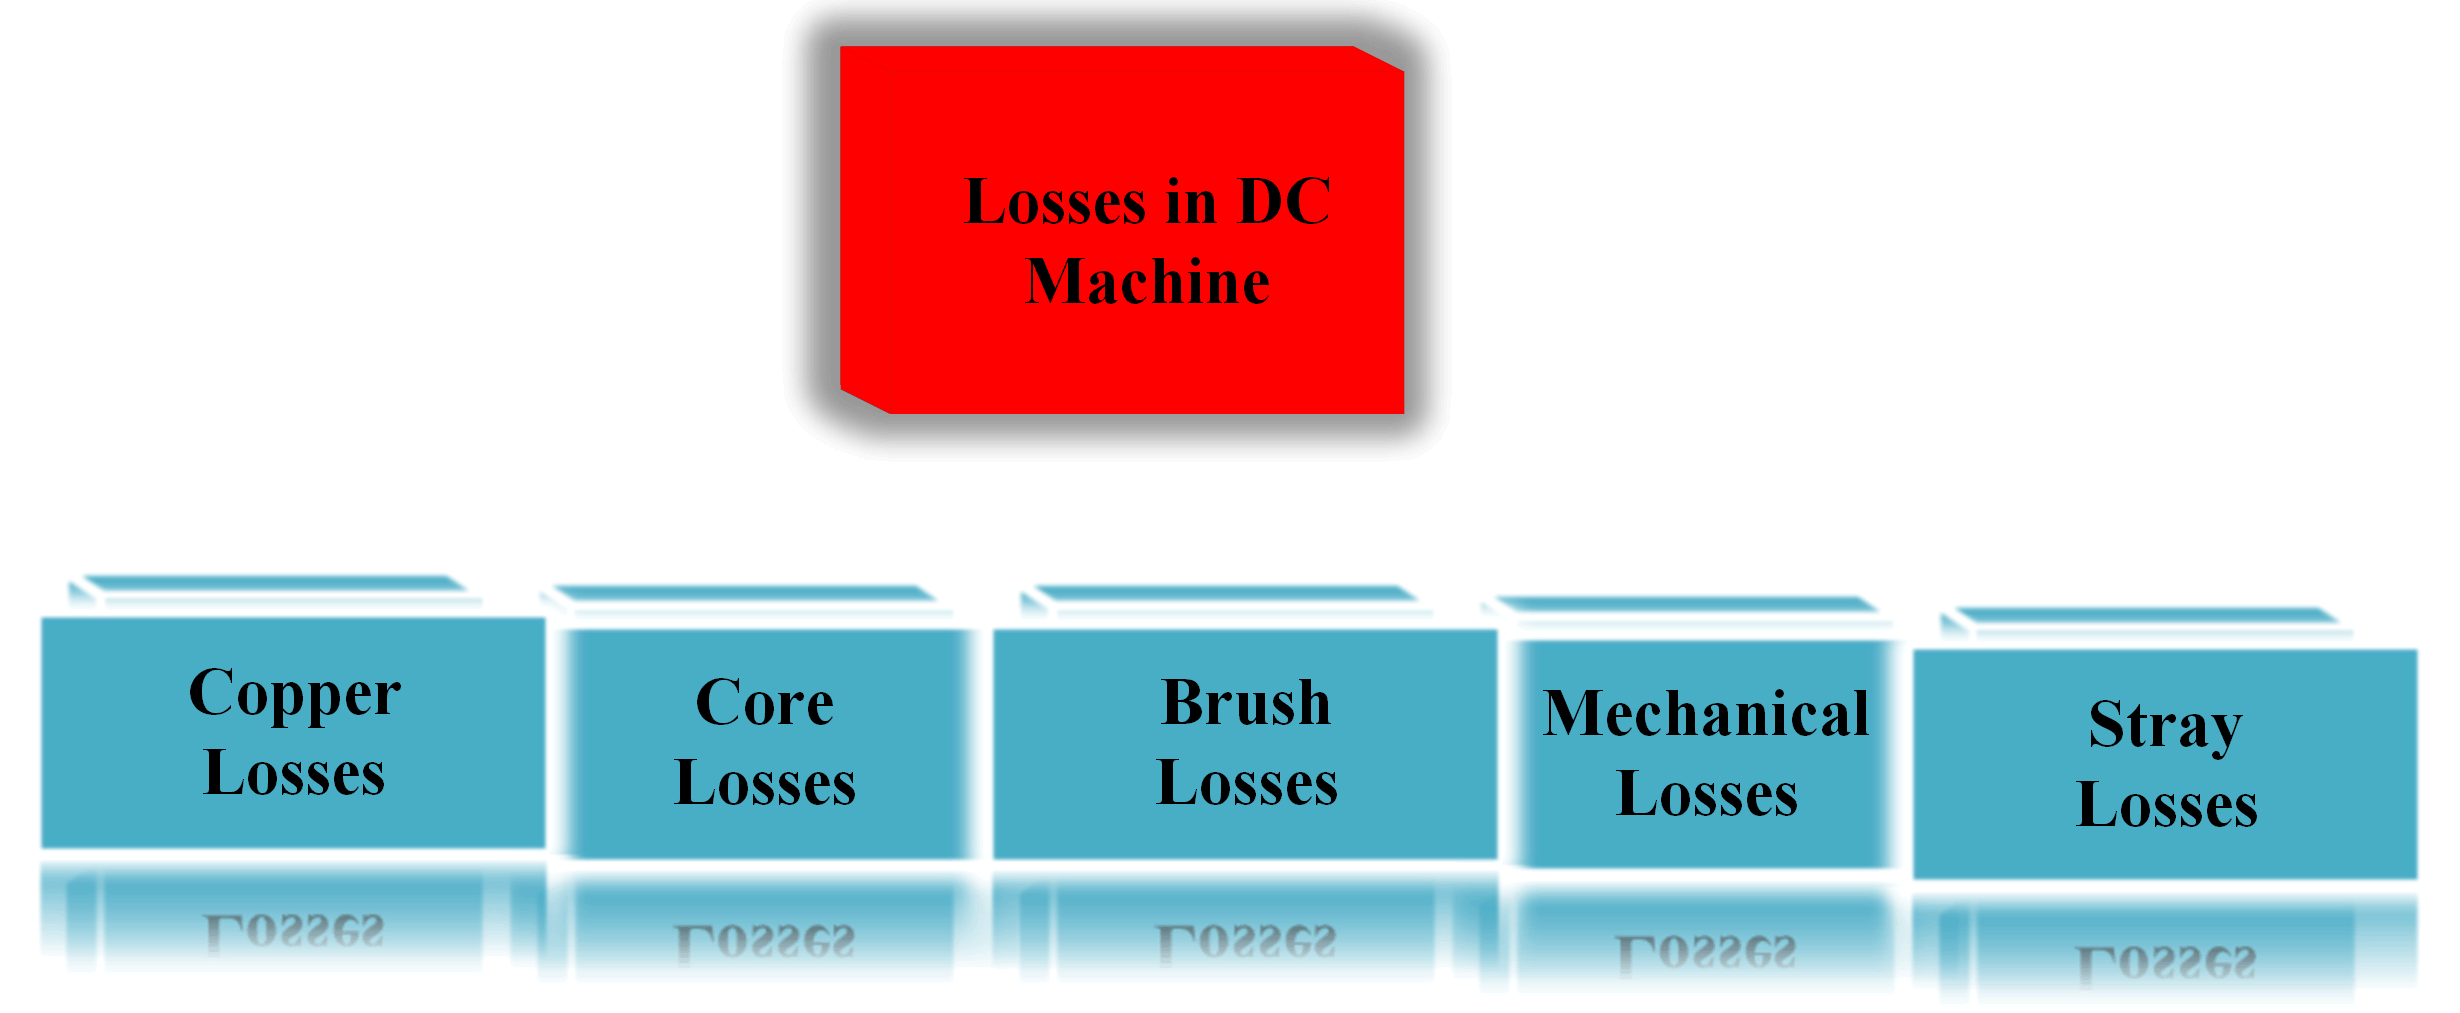 type of losses in DC Machine